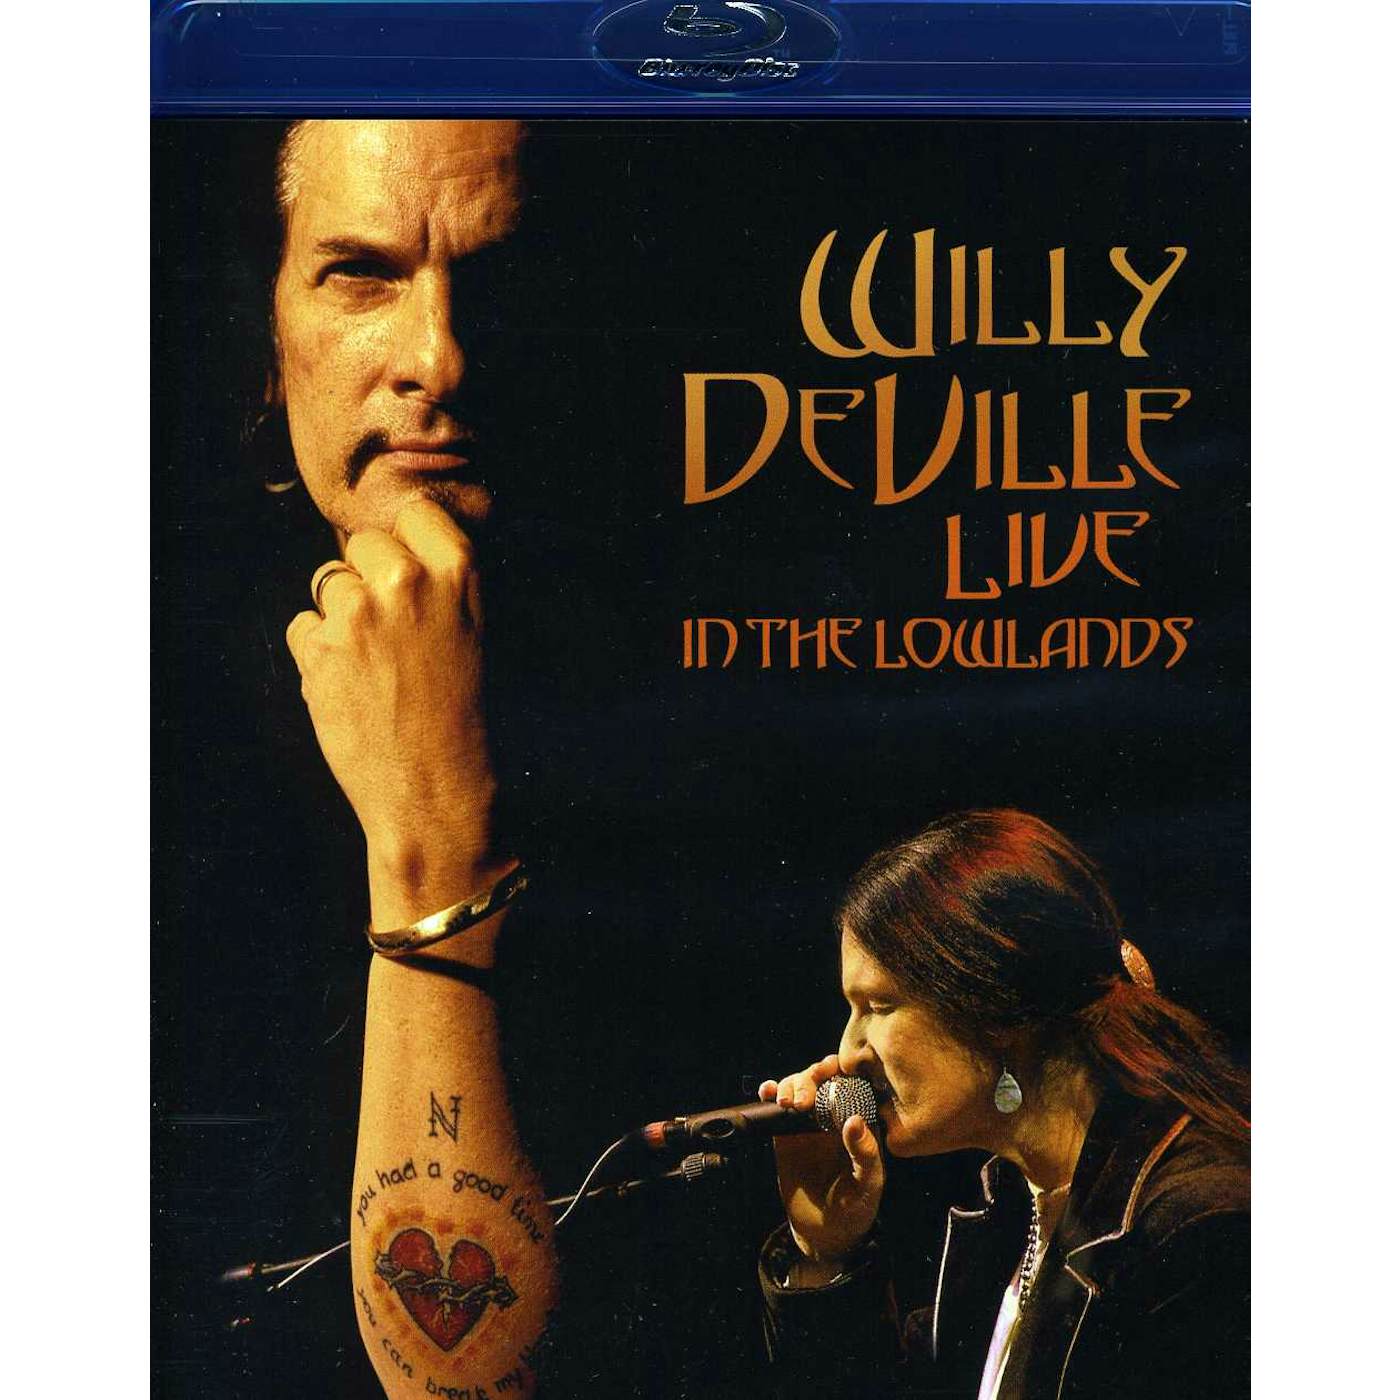 Willy DeVille LIVE IN THE LOWLANDS Blu-ray